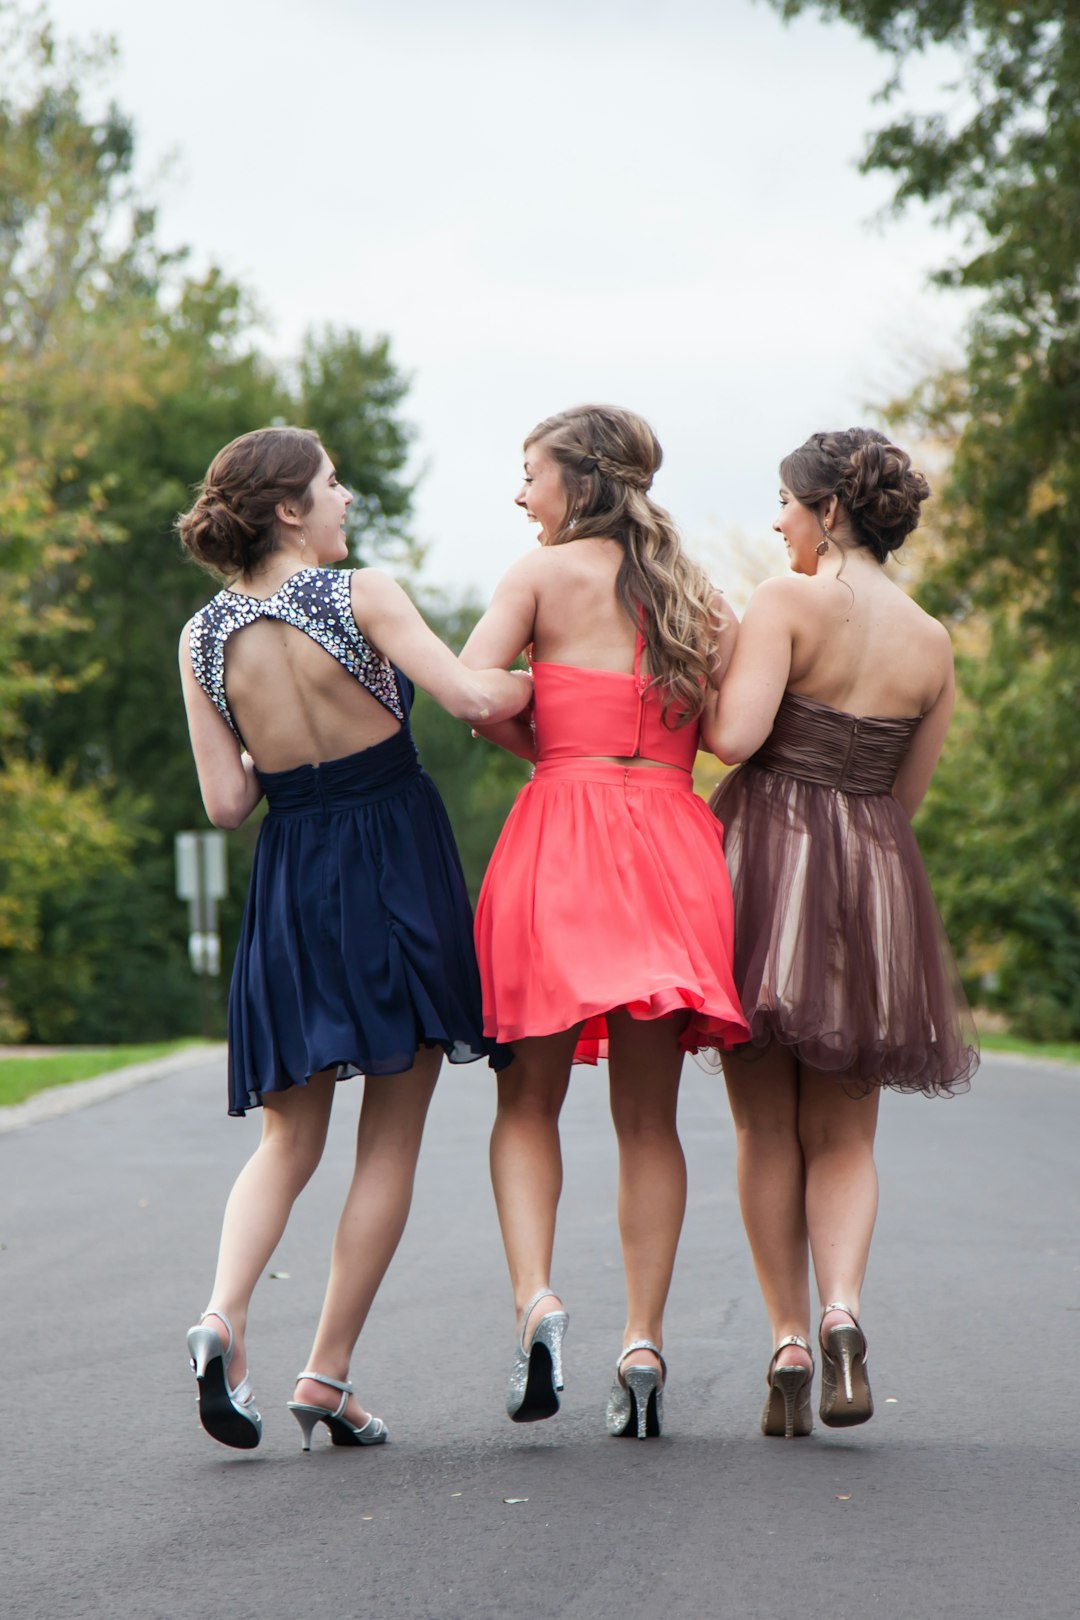 Hair and Makeup Tips for Your Memorable Prom Night